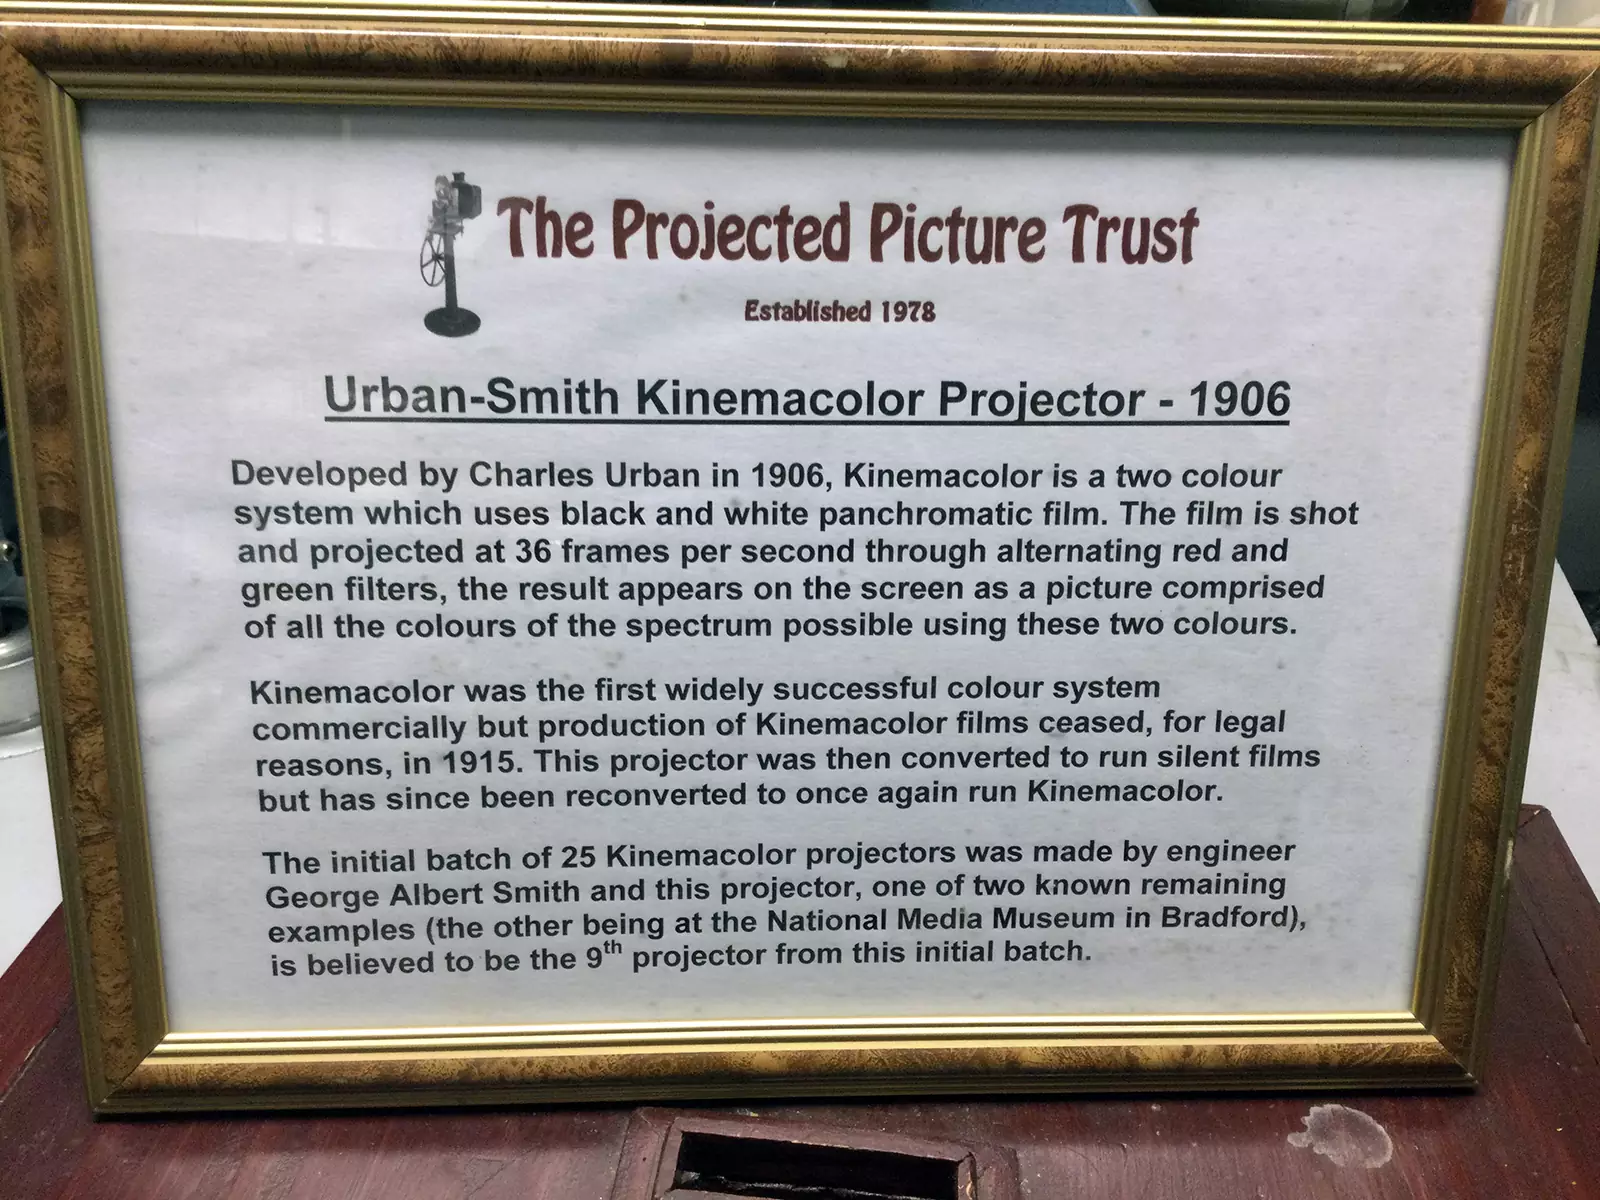 Information on the Kinemacolor projector